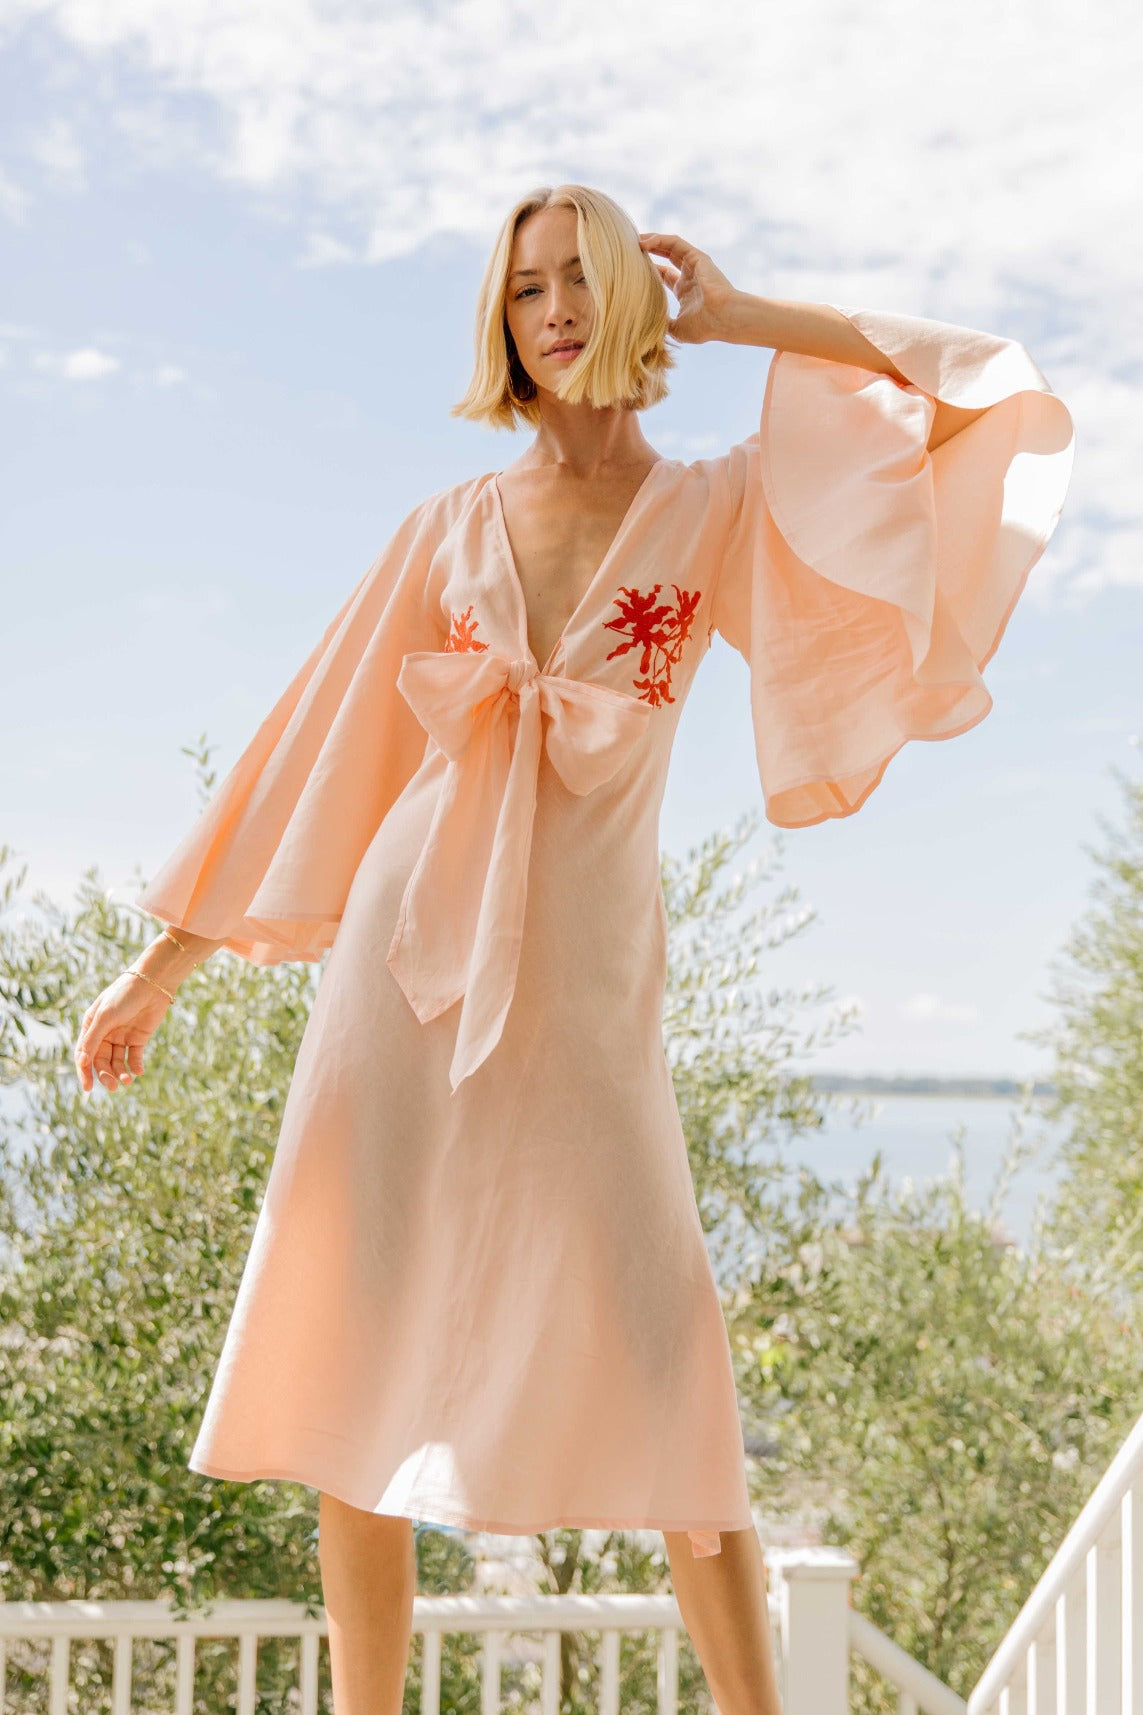 FANM MON DAYNA LINEN DRESS - LIFESTYLE IMAGE.Kimono Sleeve Knee Length Linen Dress. Featuring a biased cut, plunging neckline, embroidery detail on the front, and bow tie front detail. 